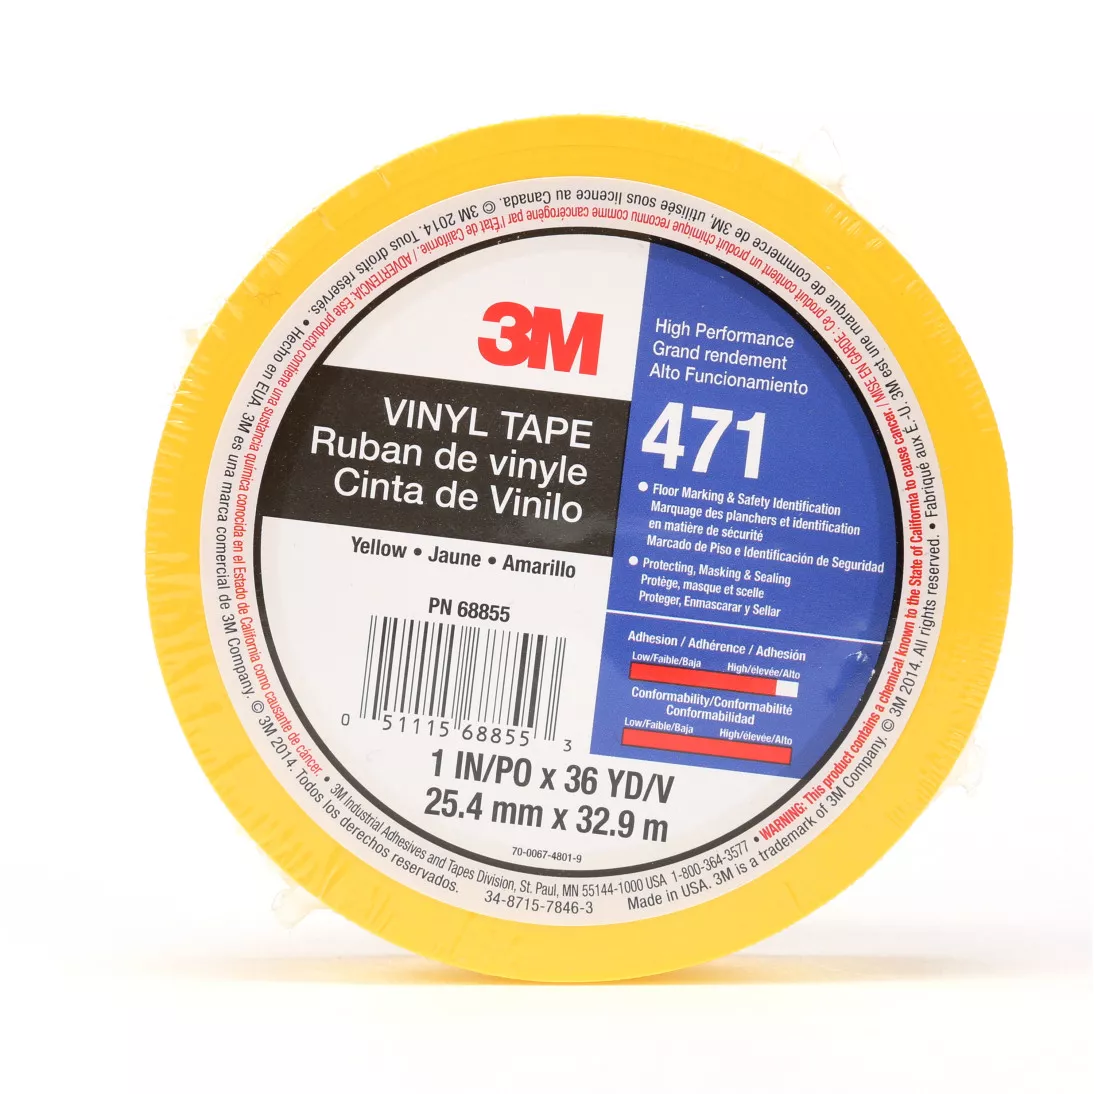 3M™ Vinyl Tape 471, Yellow, 1 in x 36 yd, 5.2 mil, 36 rolls per case,
Individually Wrapped Conveniently Packaged